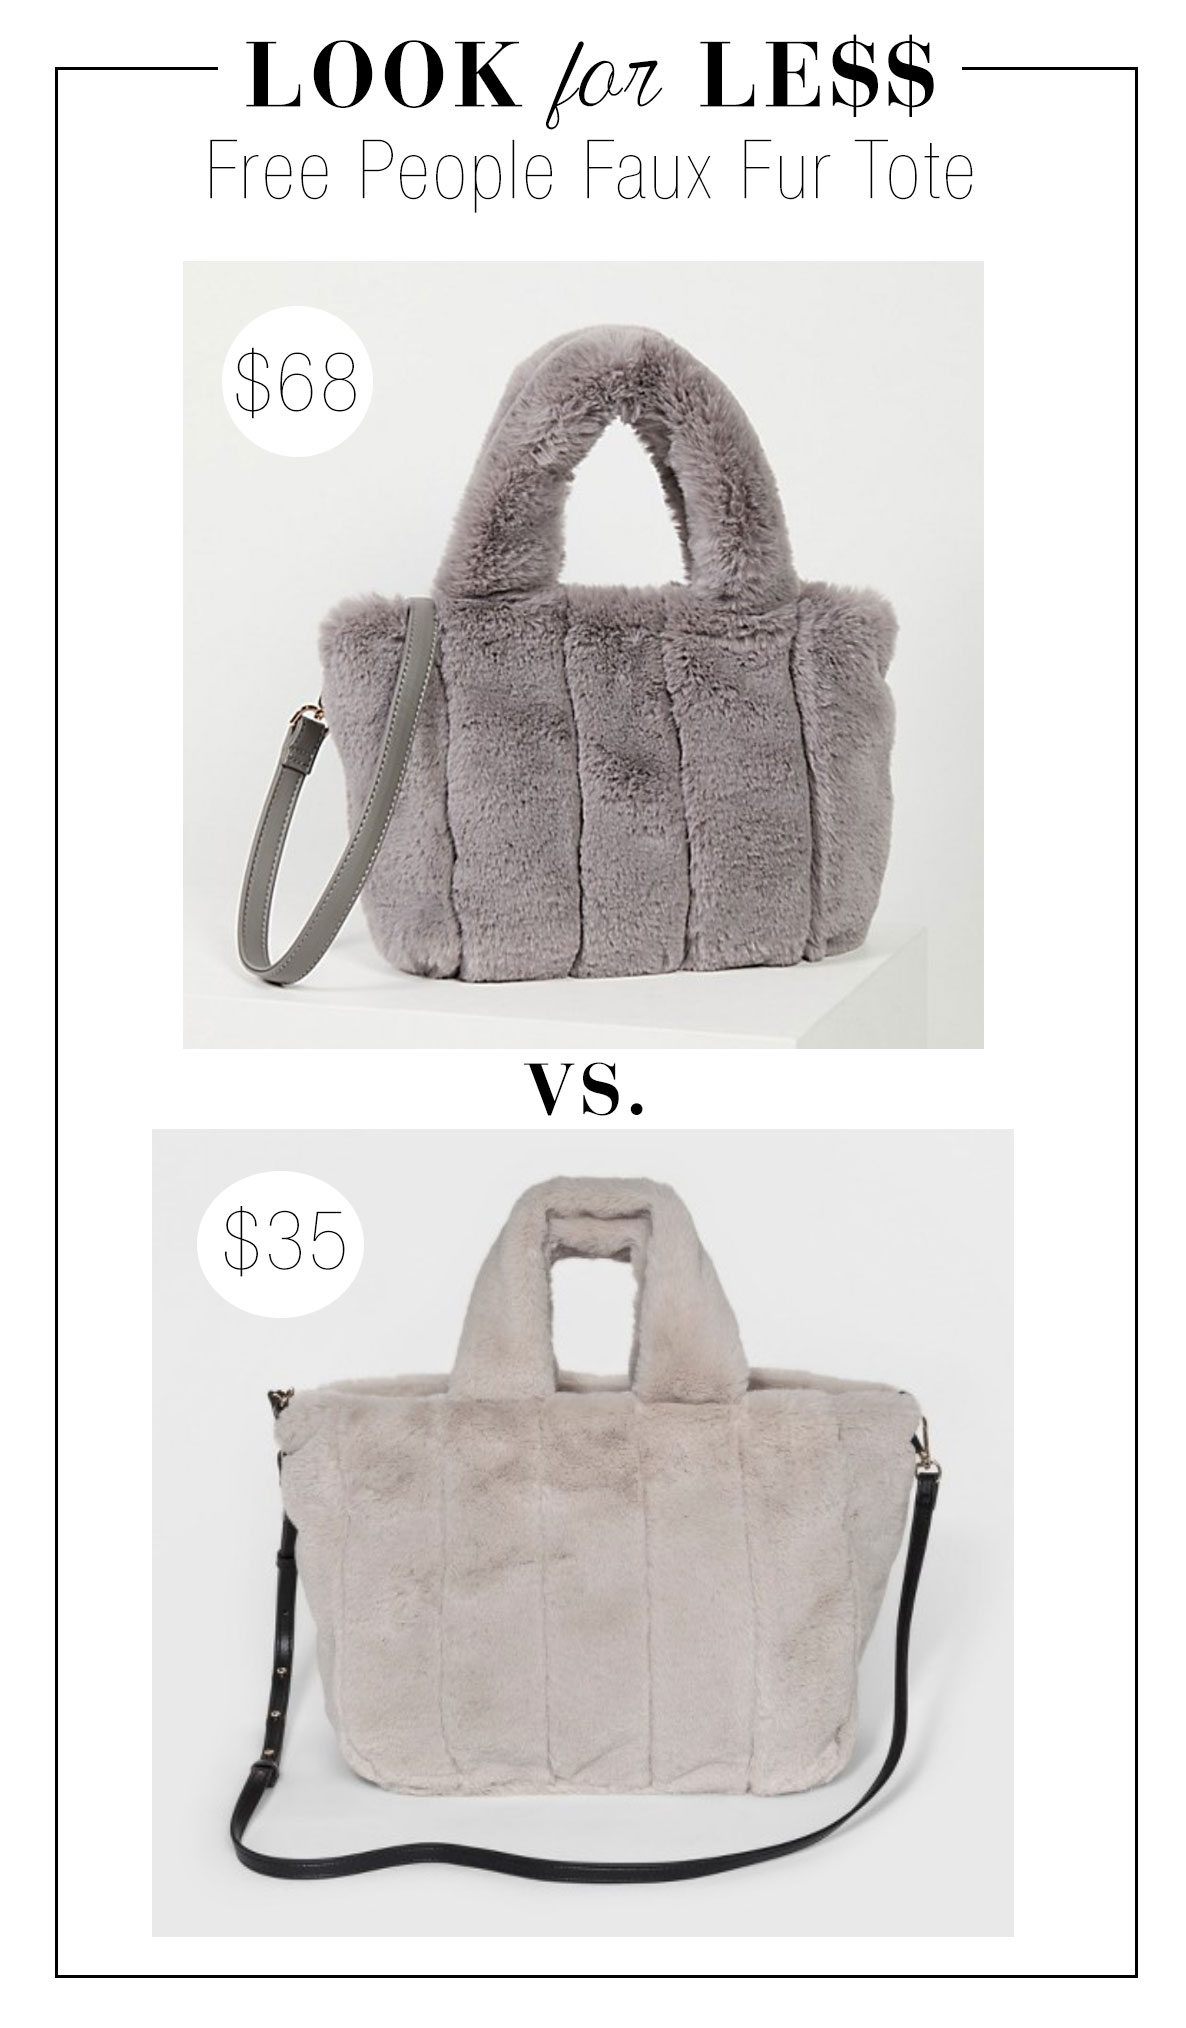 Free People faux fur bag and the look for less